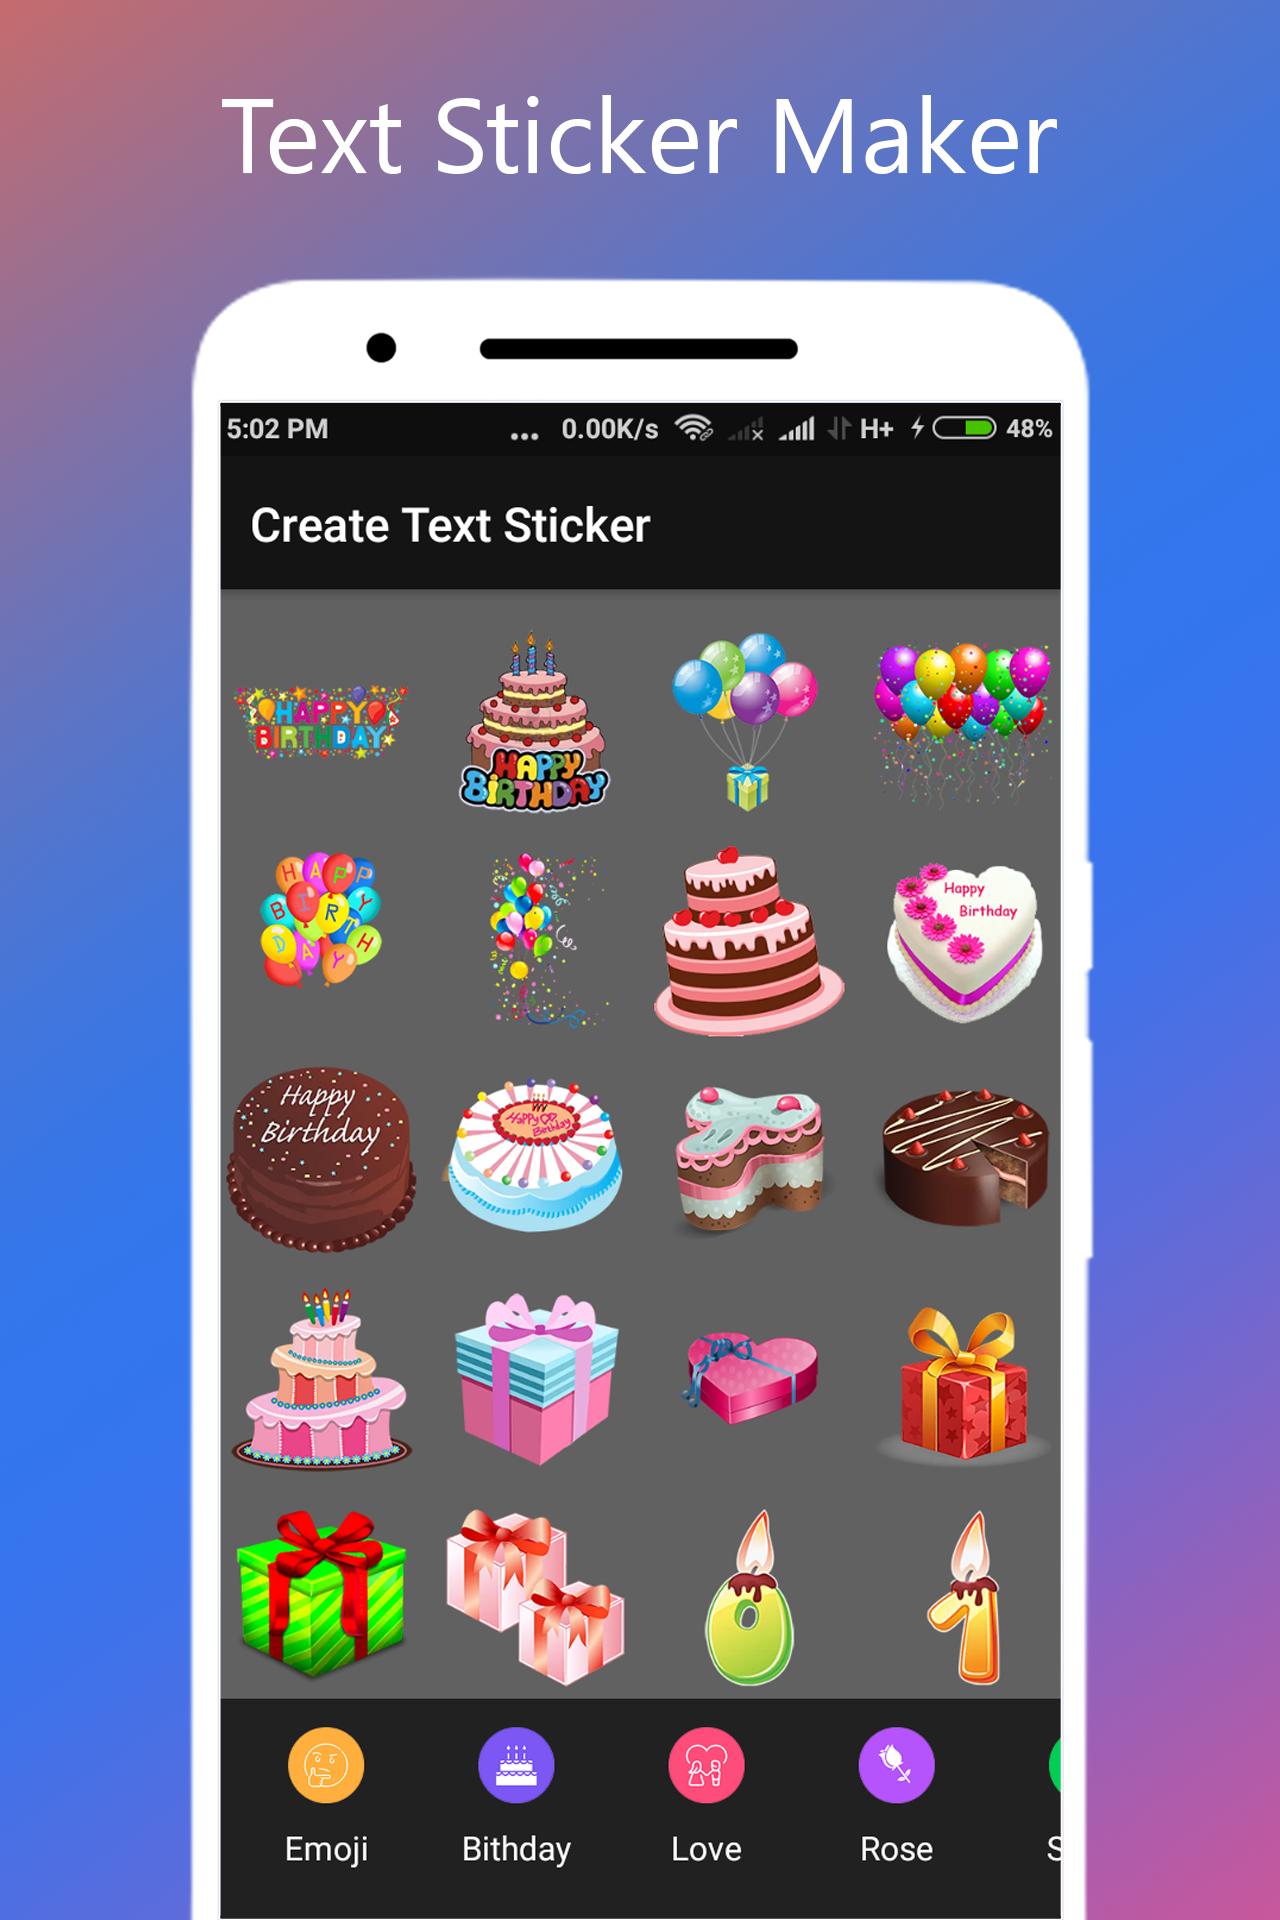 Create Sticker - Text Sticker Maker for Whatsapp for Android - APK Download